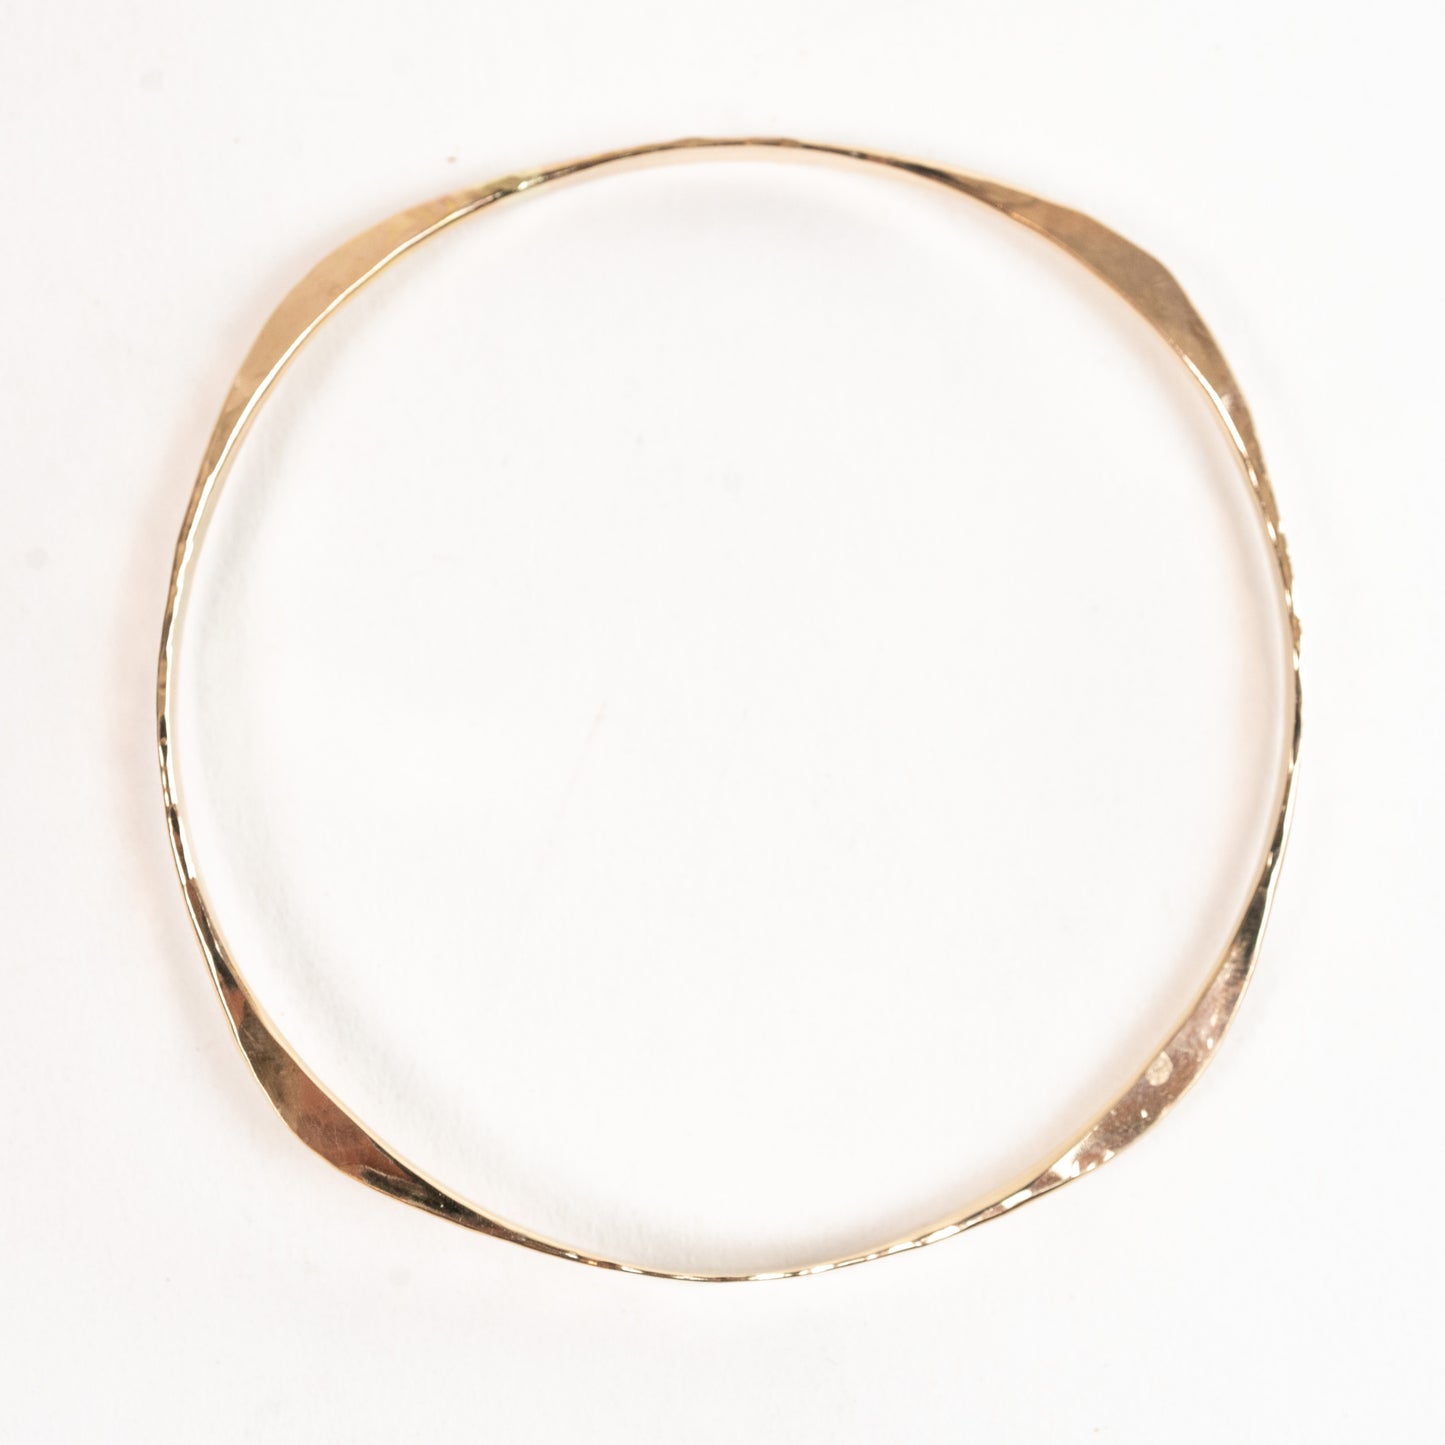 Bangle Bracelets - 14k Solid Yellow Gold Custom hand forged Four Way